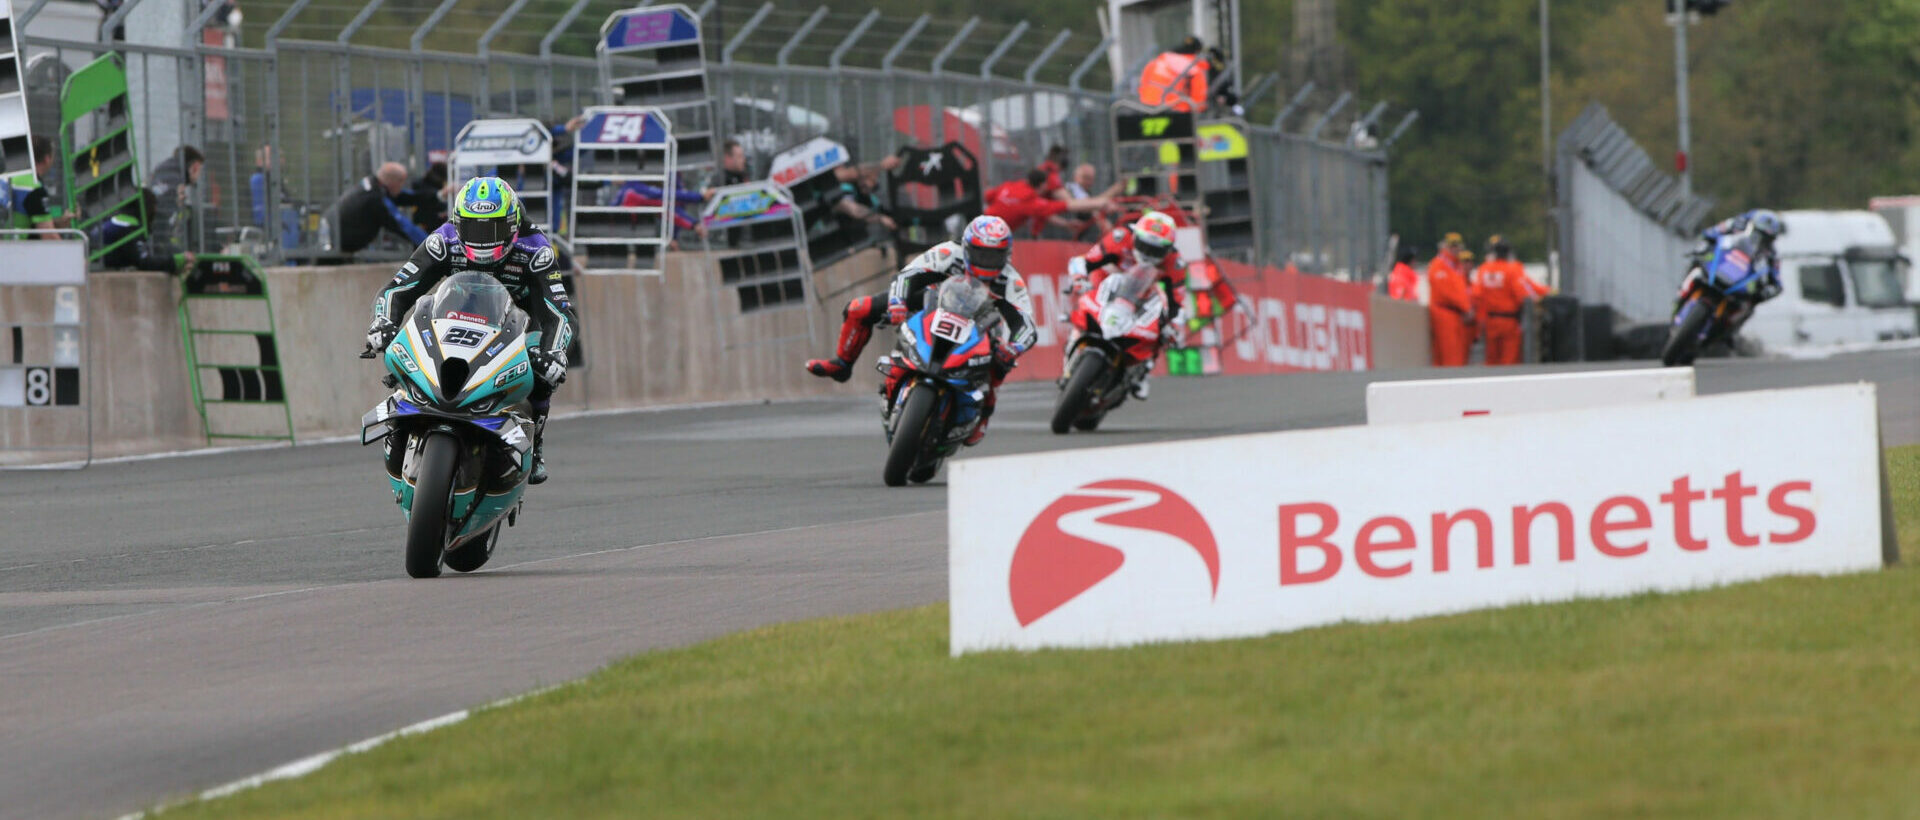 Josh Brookes (25) leads Leon Haslam (91) and the rest during Race One at Oulton Park. Photo courtesy MSVR.